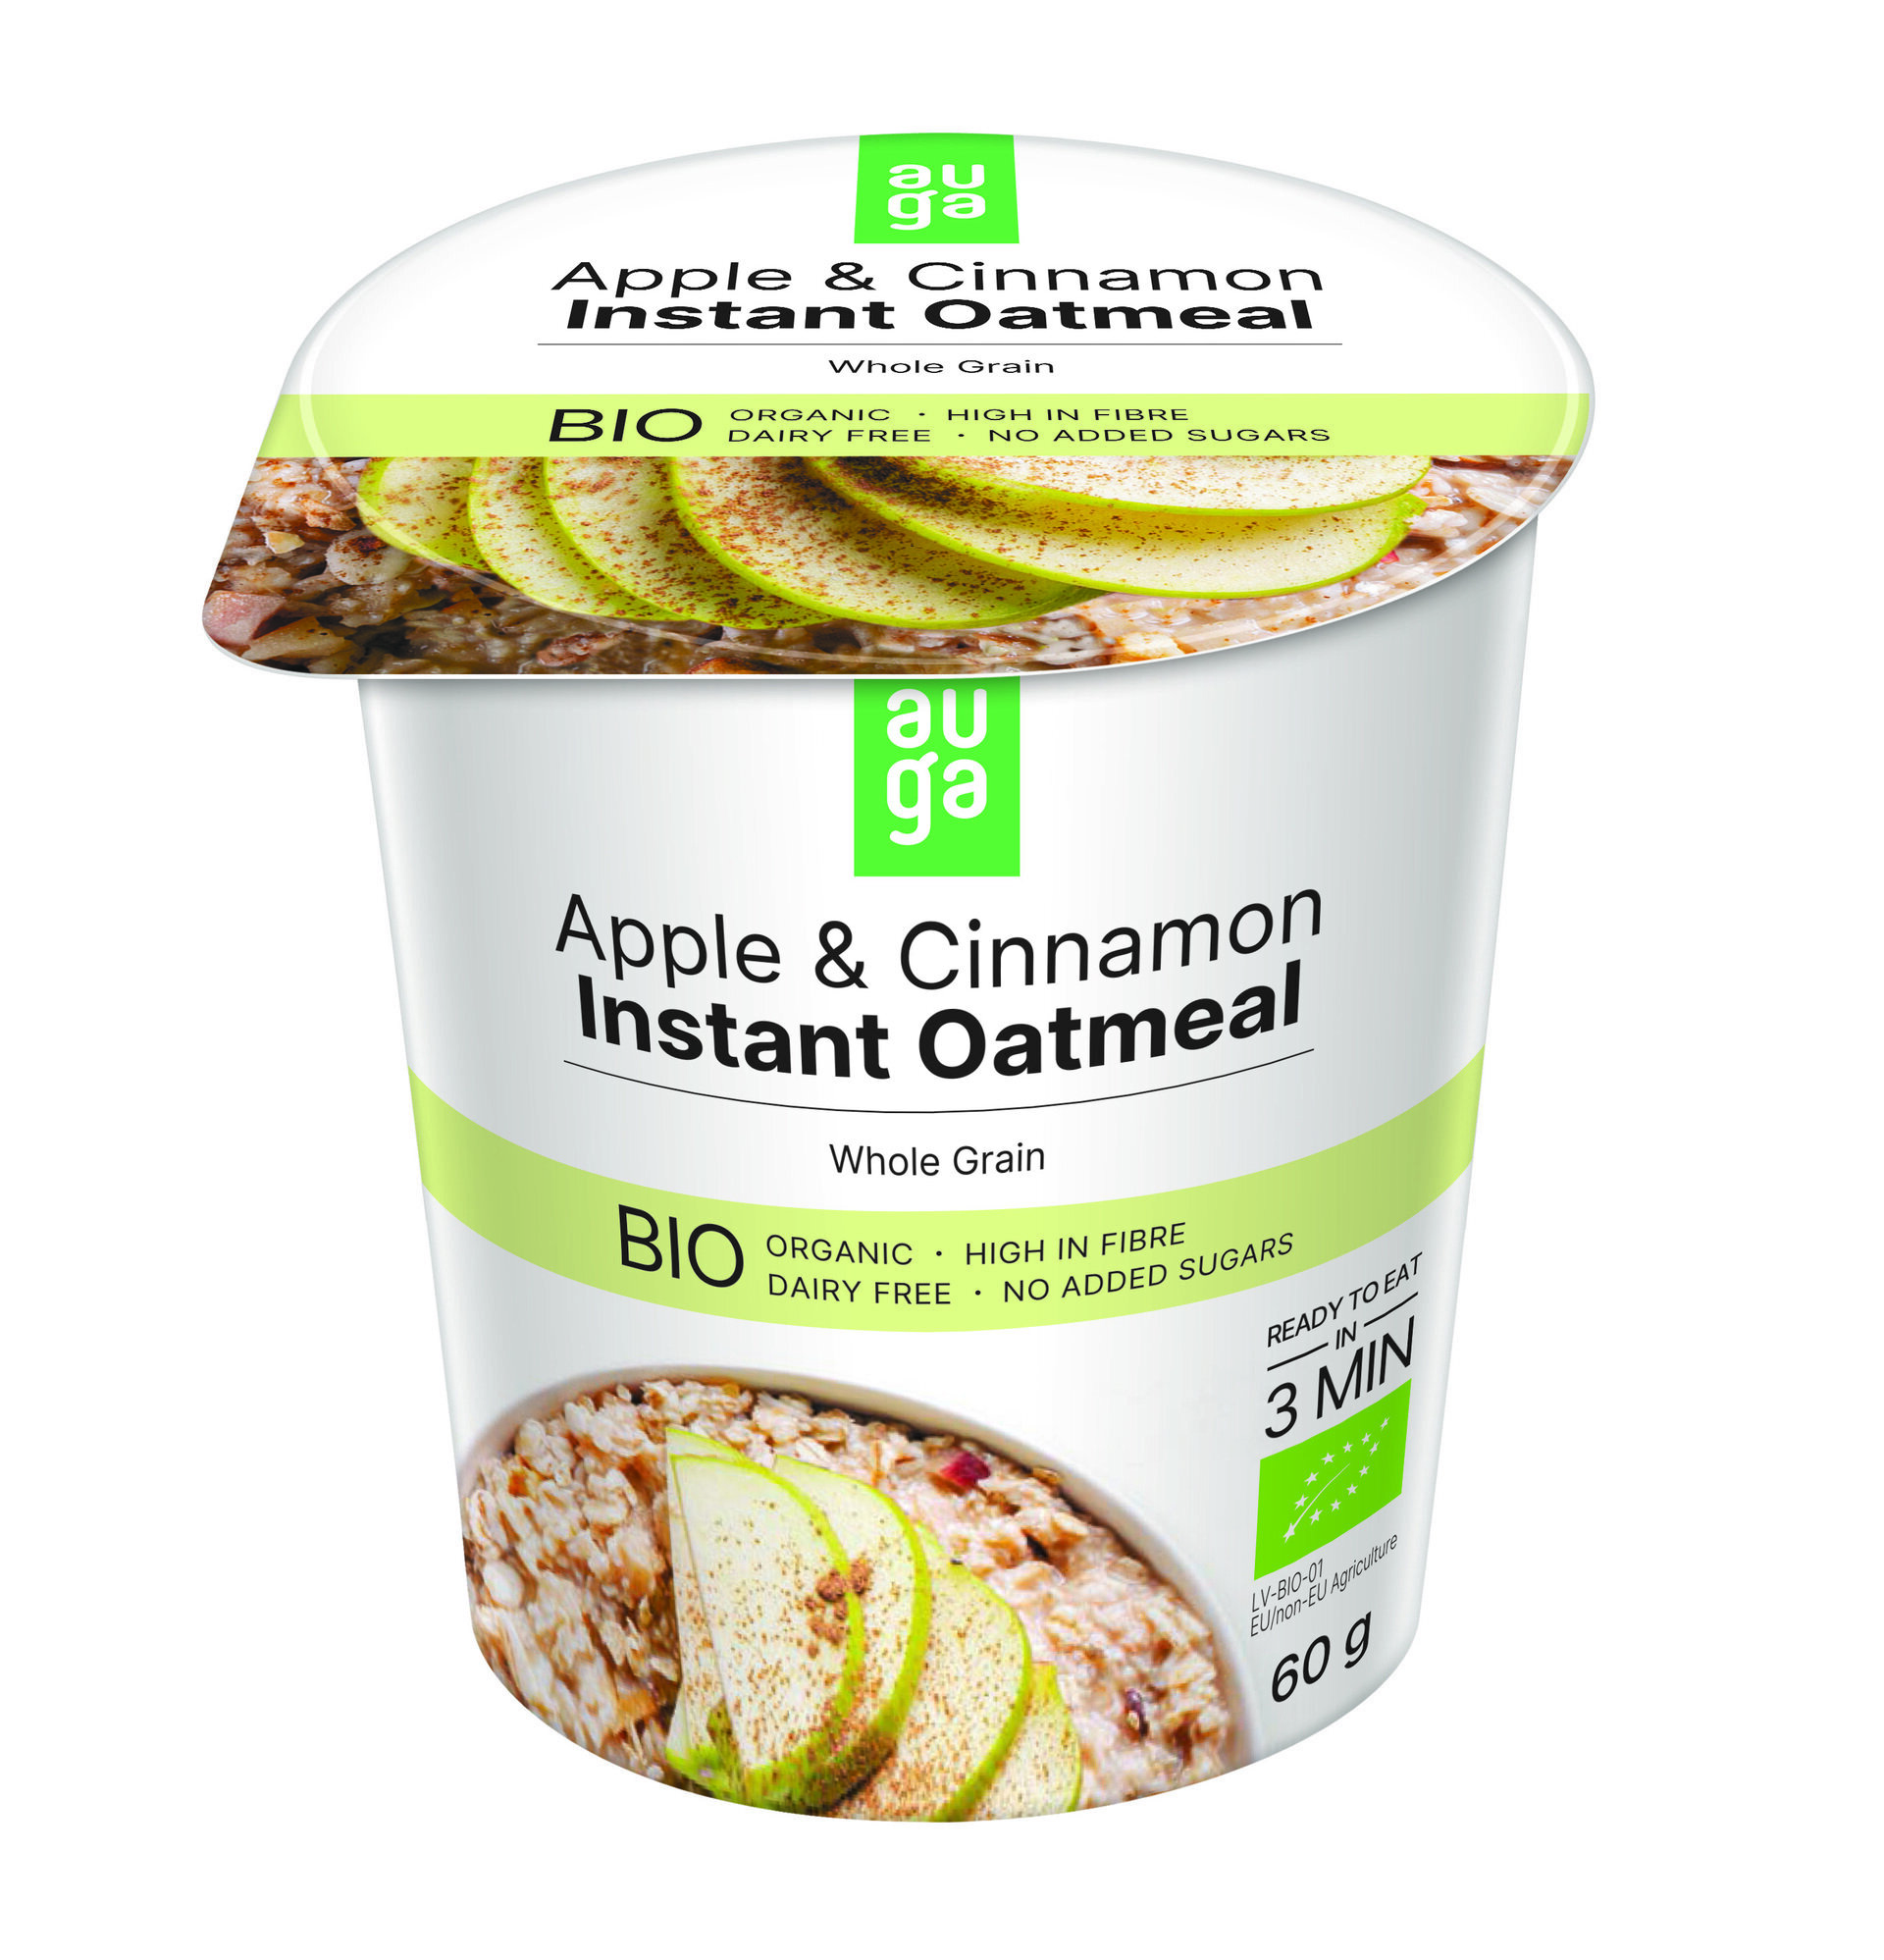 AUGA ORGANIC oatmeal with apples and cinnamon 60g expirace